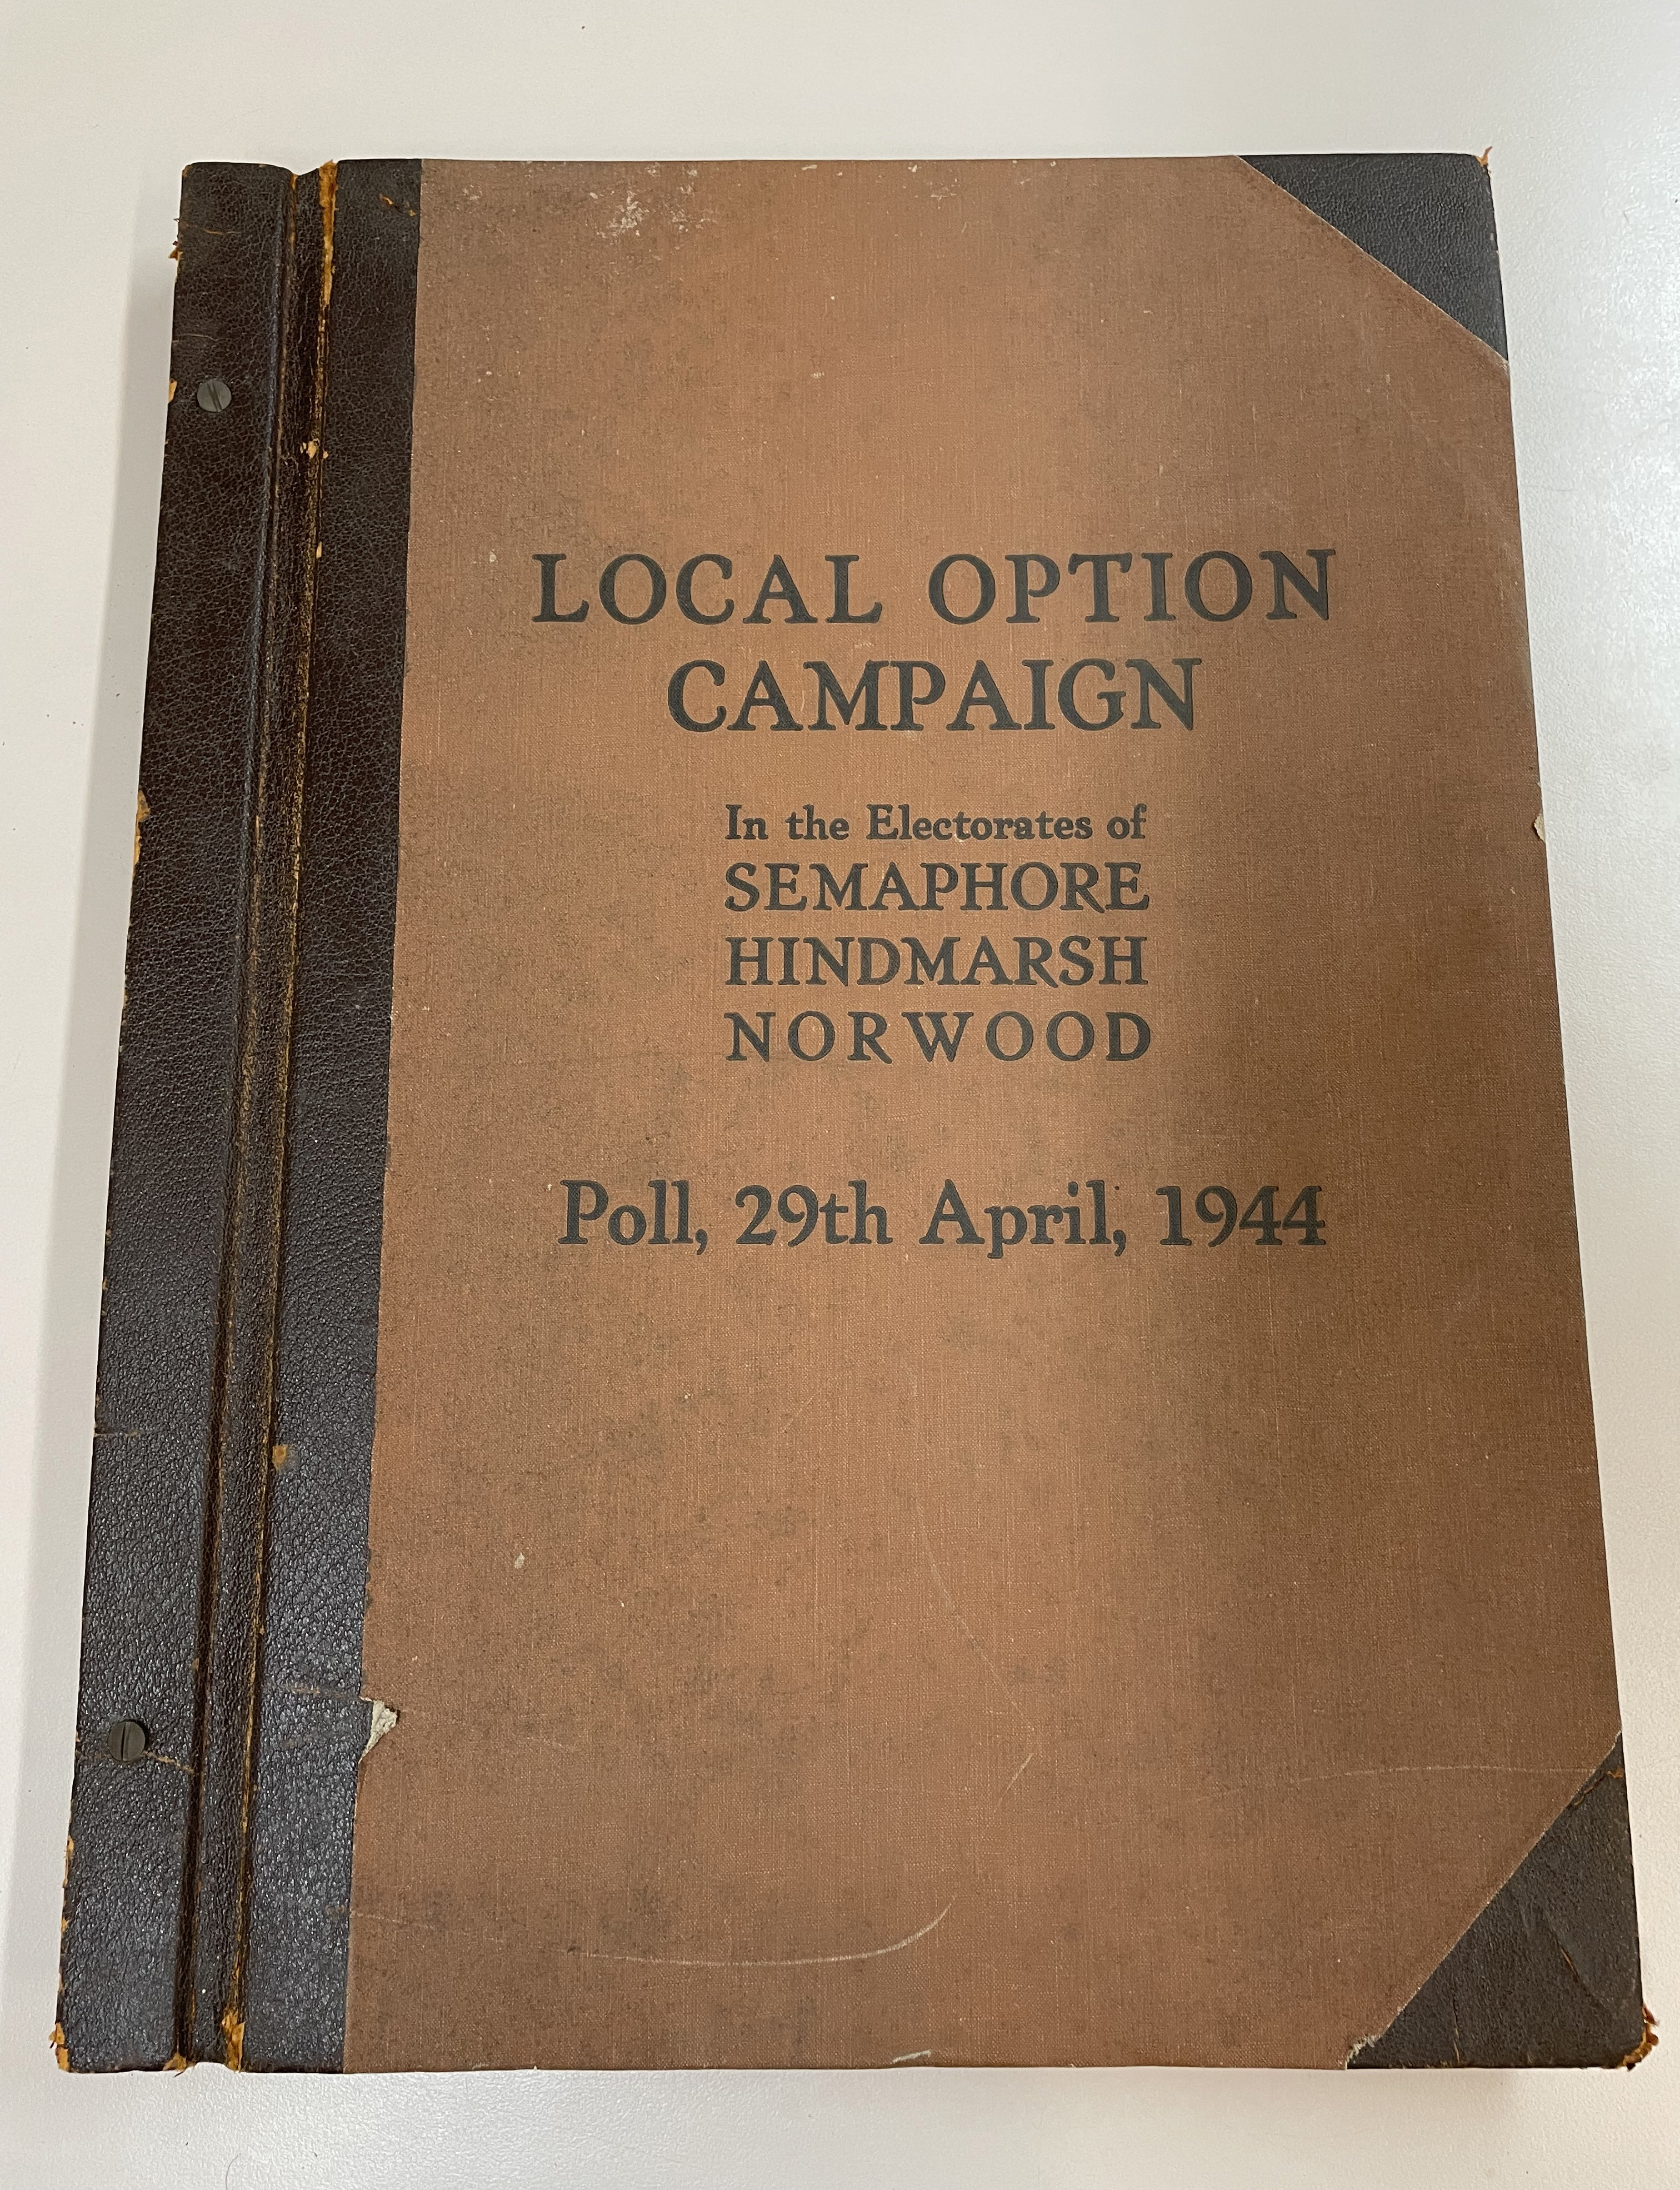 Local option campaign book, after cleaning by the State Library of SA.